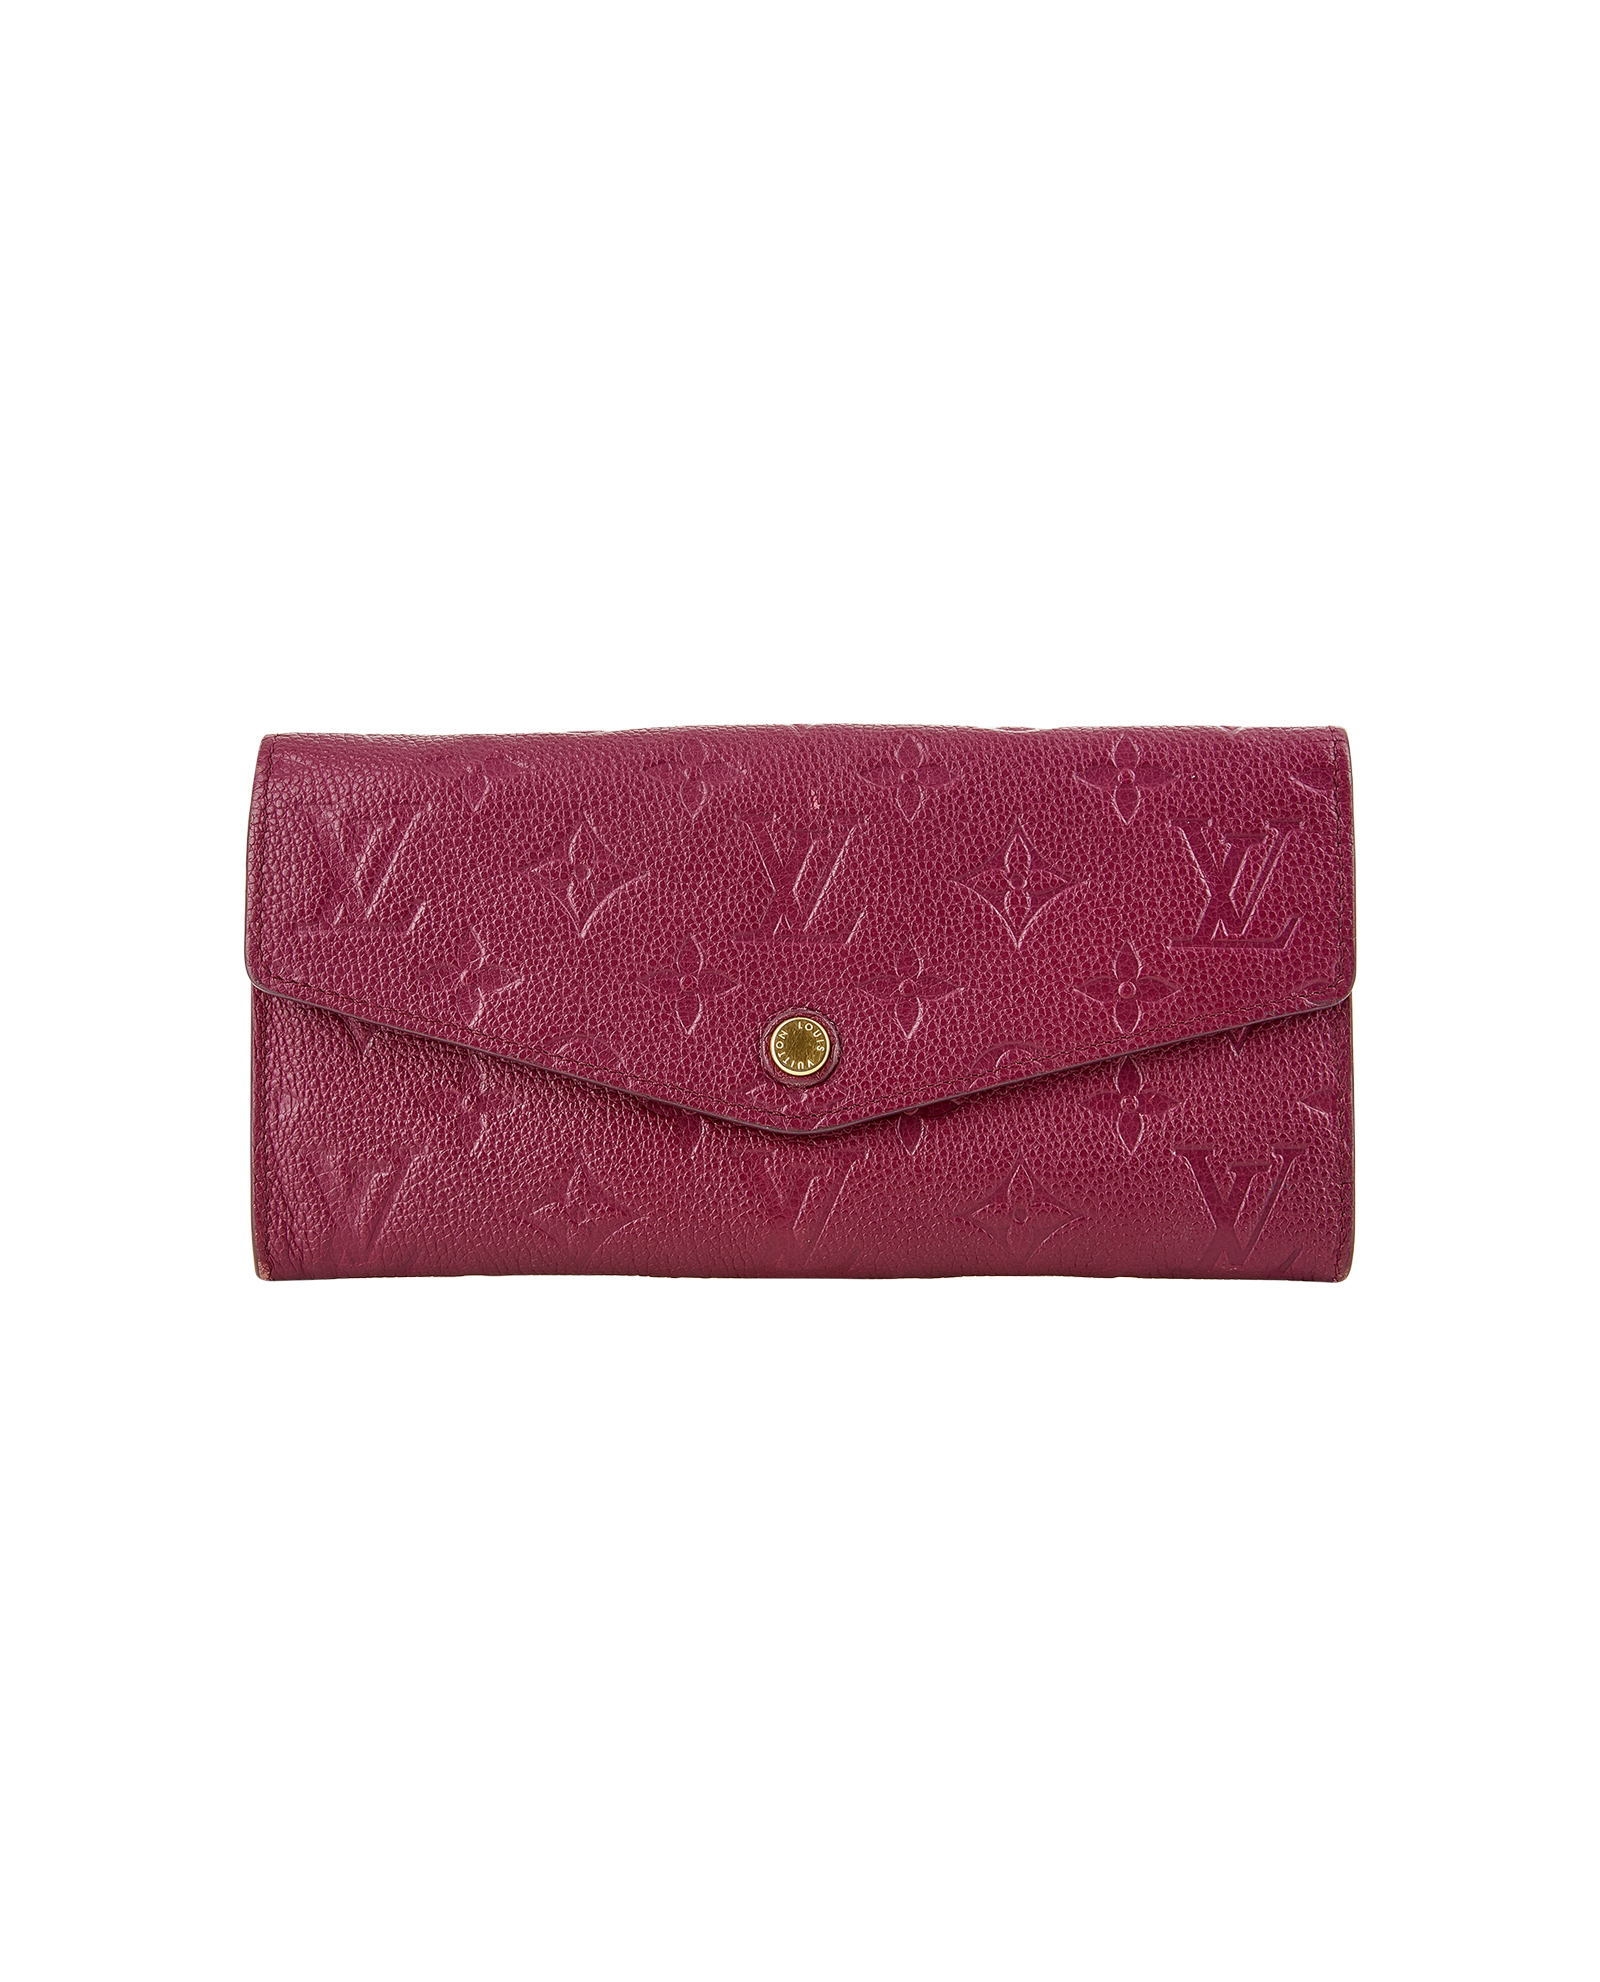 Louis Vuitton Curieuse Wallet, Small Leather Goods - Designer